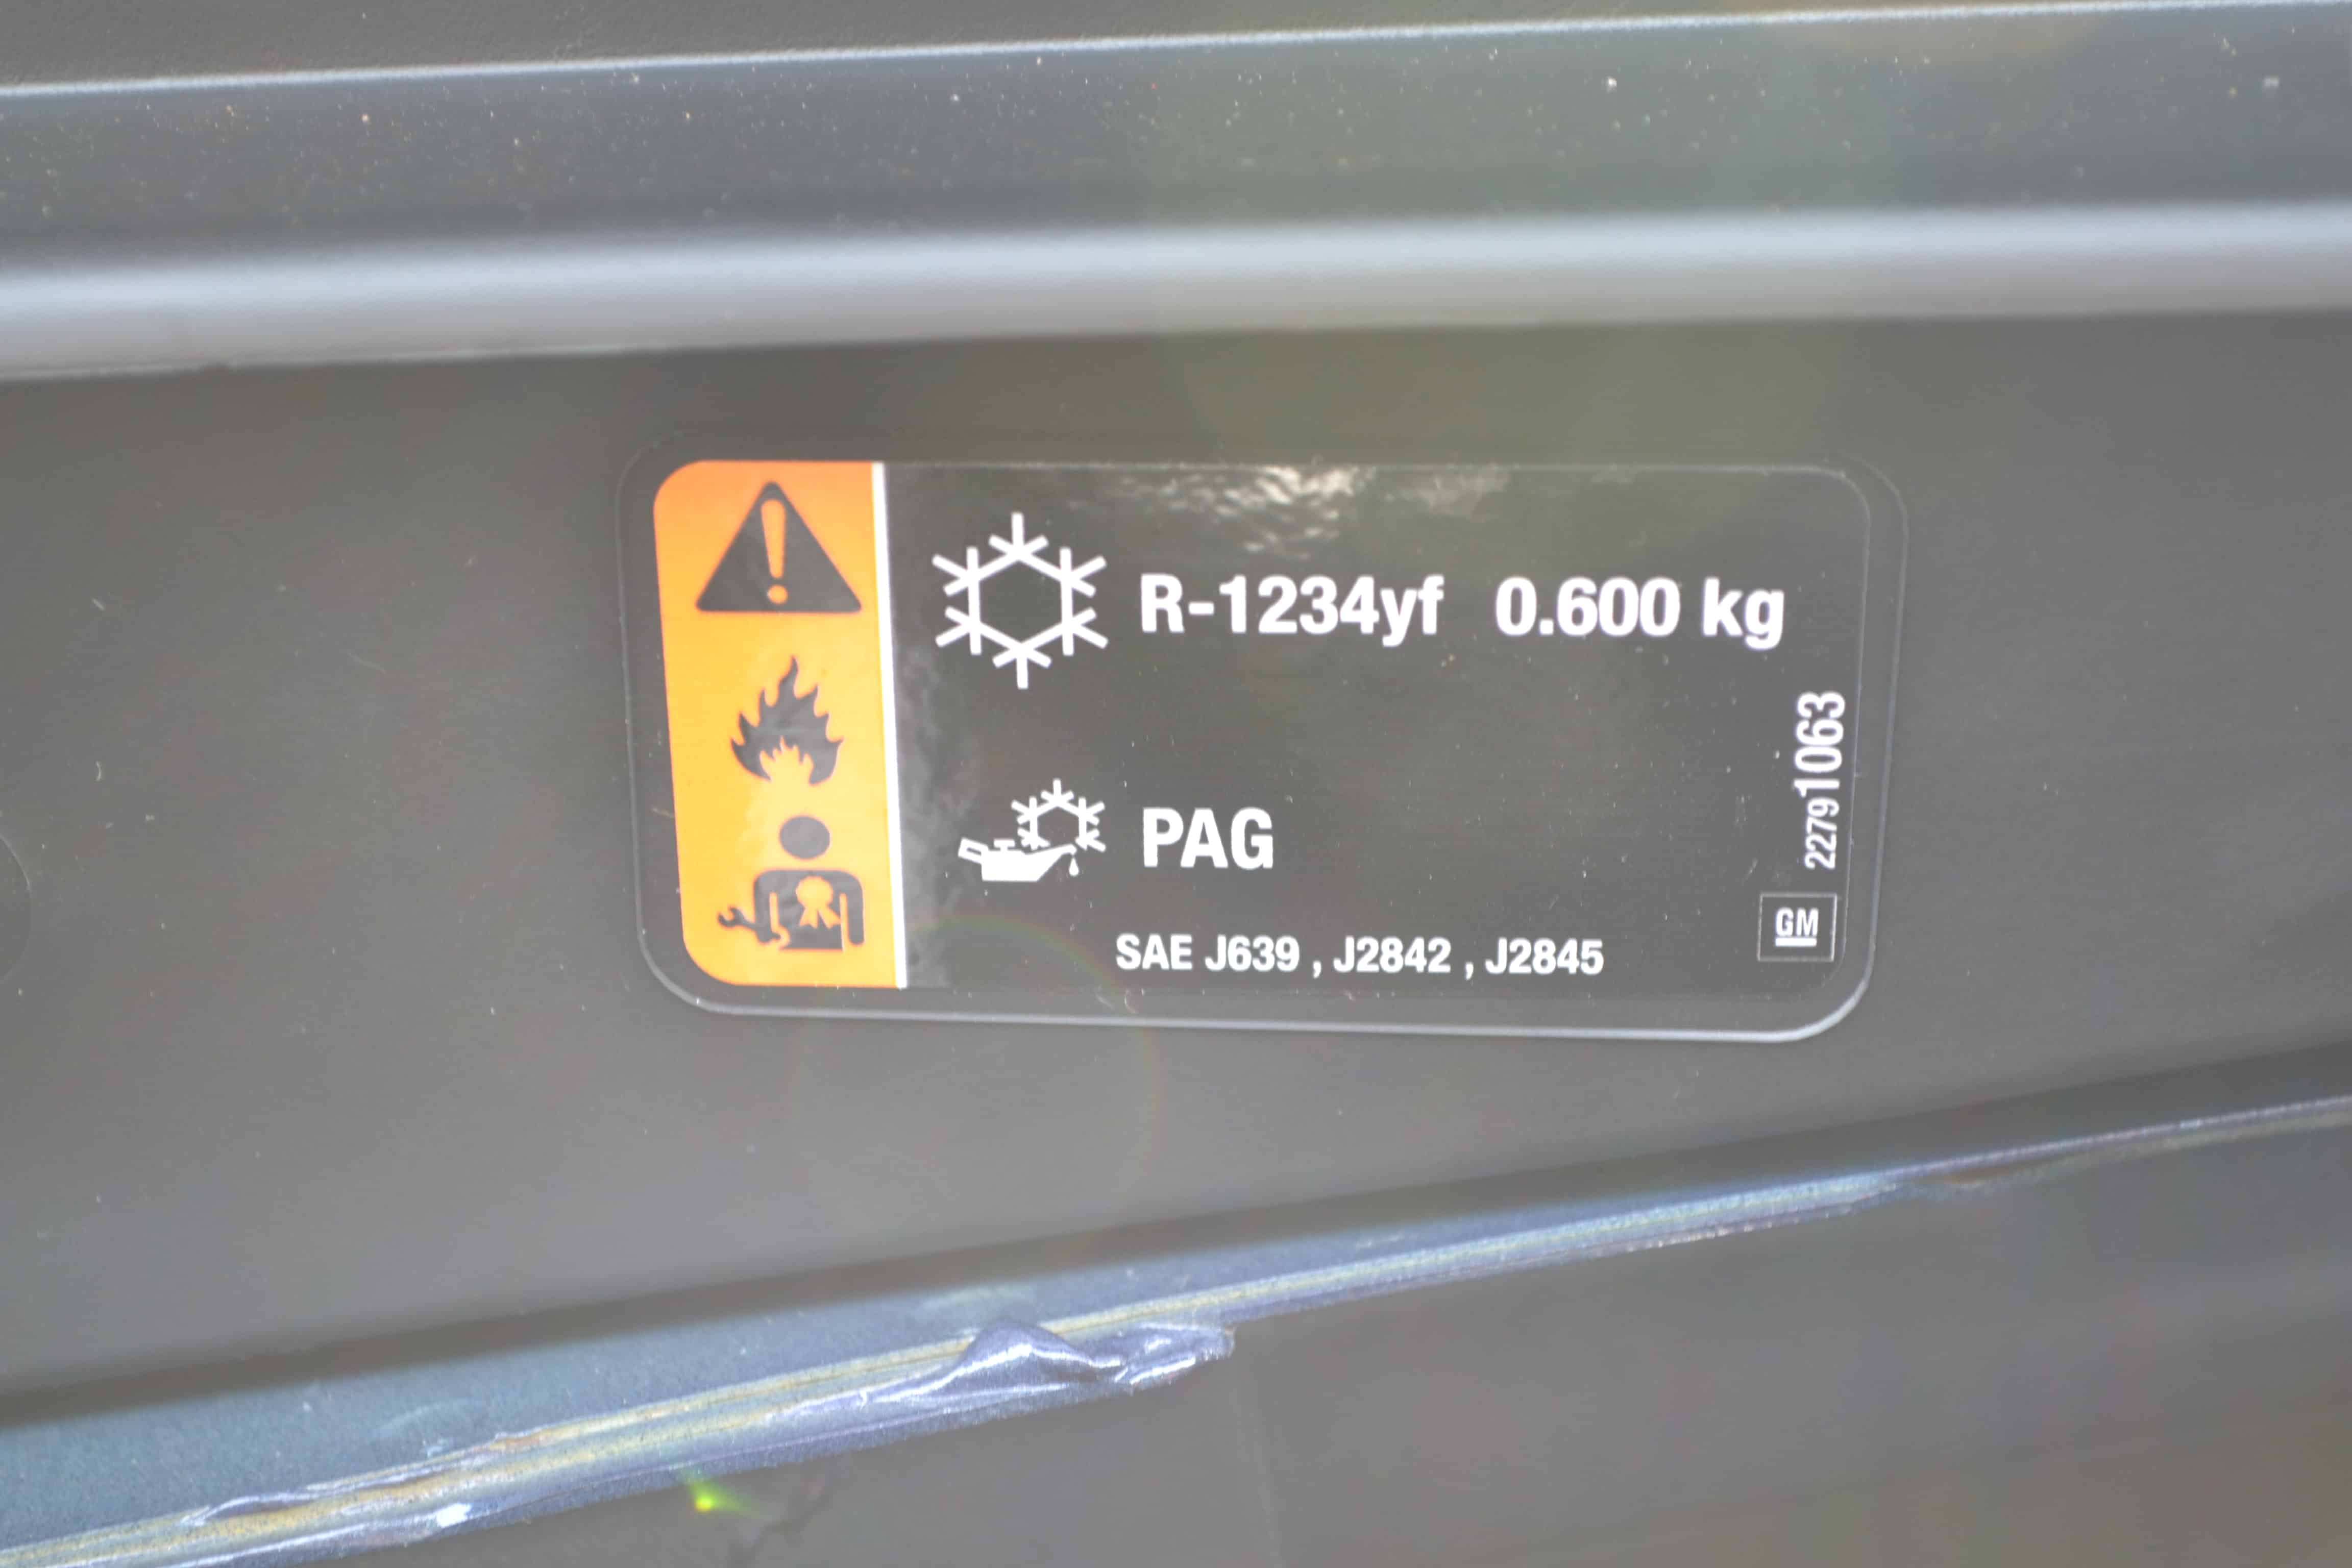 2017 Malibus with R-1234yf use 0.600 kg (kilograms) of the gas, equivalent to 1.32 pounds (21.16 ounces). Not used to seeing kg on an A/C label? You should be! Grams (or kilograms to three decimal places), is the official unit of measure called for in the SAE J639 Standard which requires the label to be there. Manufacturers are allowed to include other units as well like pounds, ounces or cc, but must list the proper amount in g or kg.